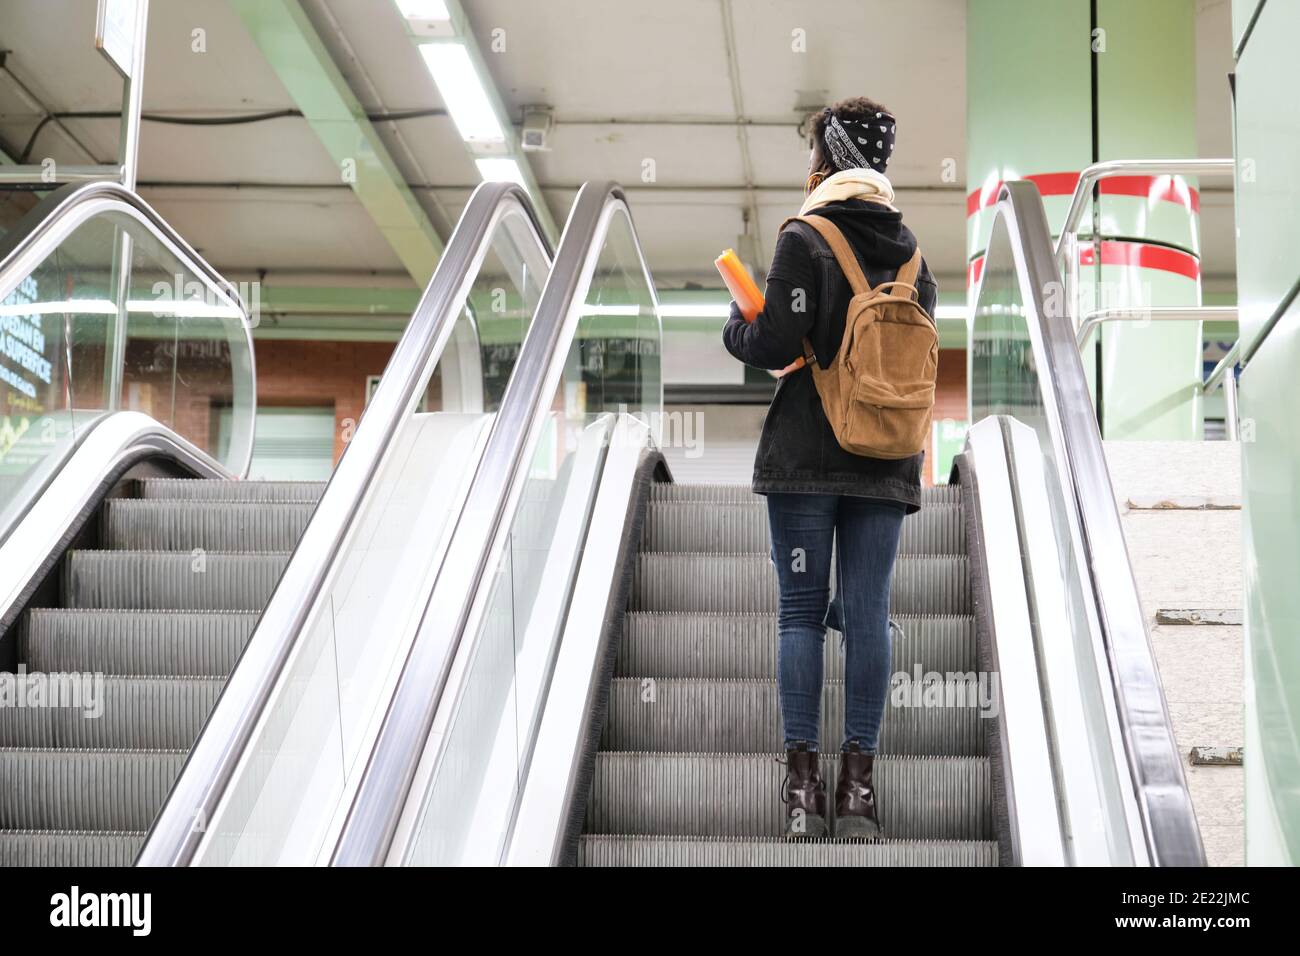 university female african student wearing protective face mask taking escalator upstairs at the underground station. New normal in public transport. Stock Photo